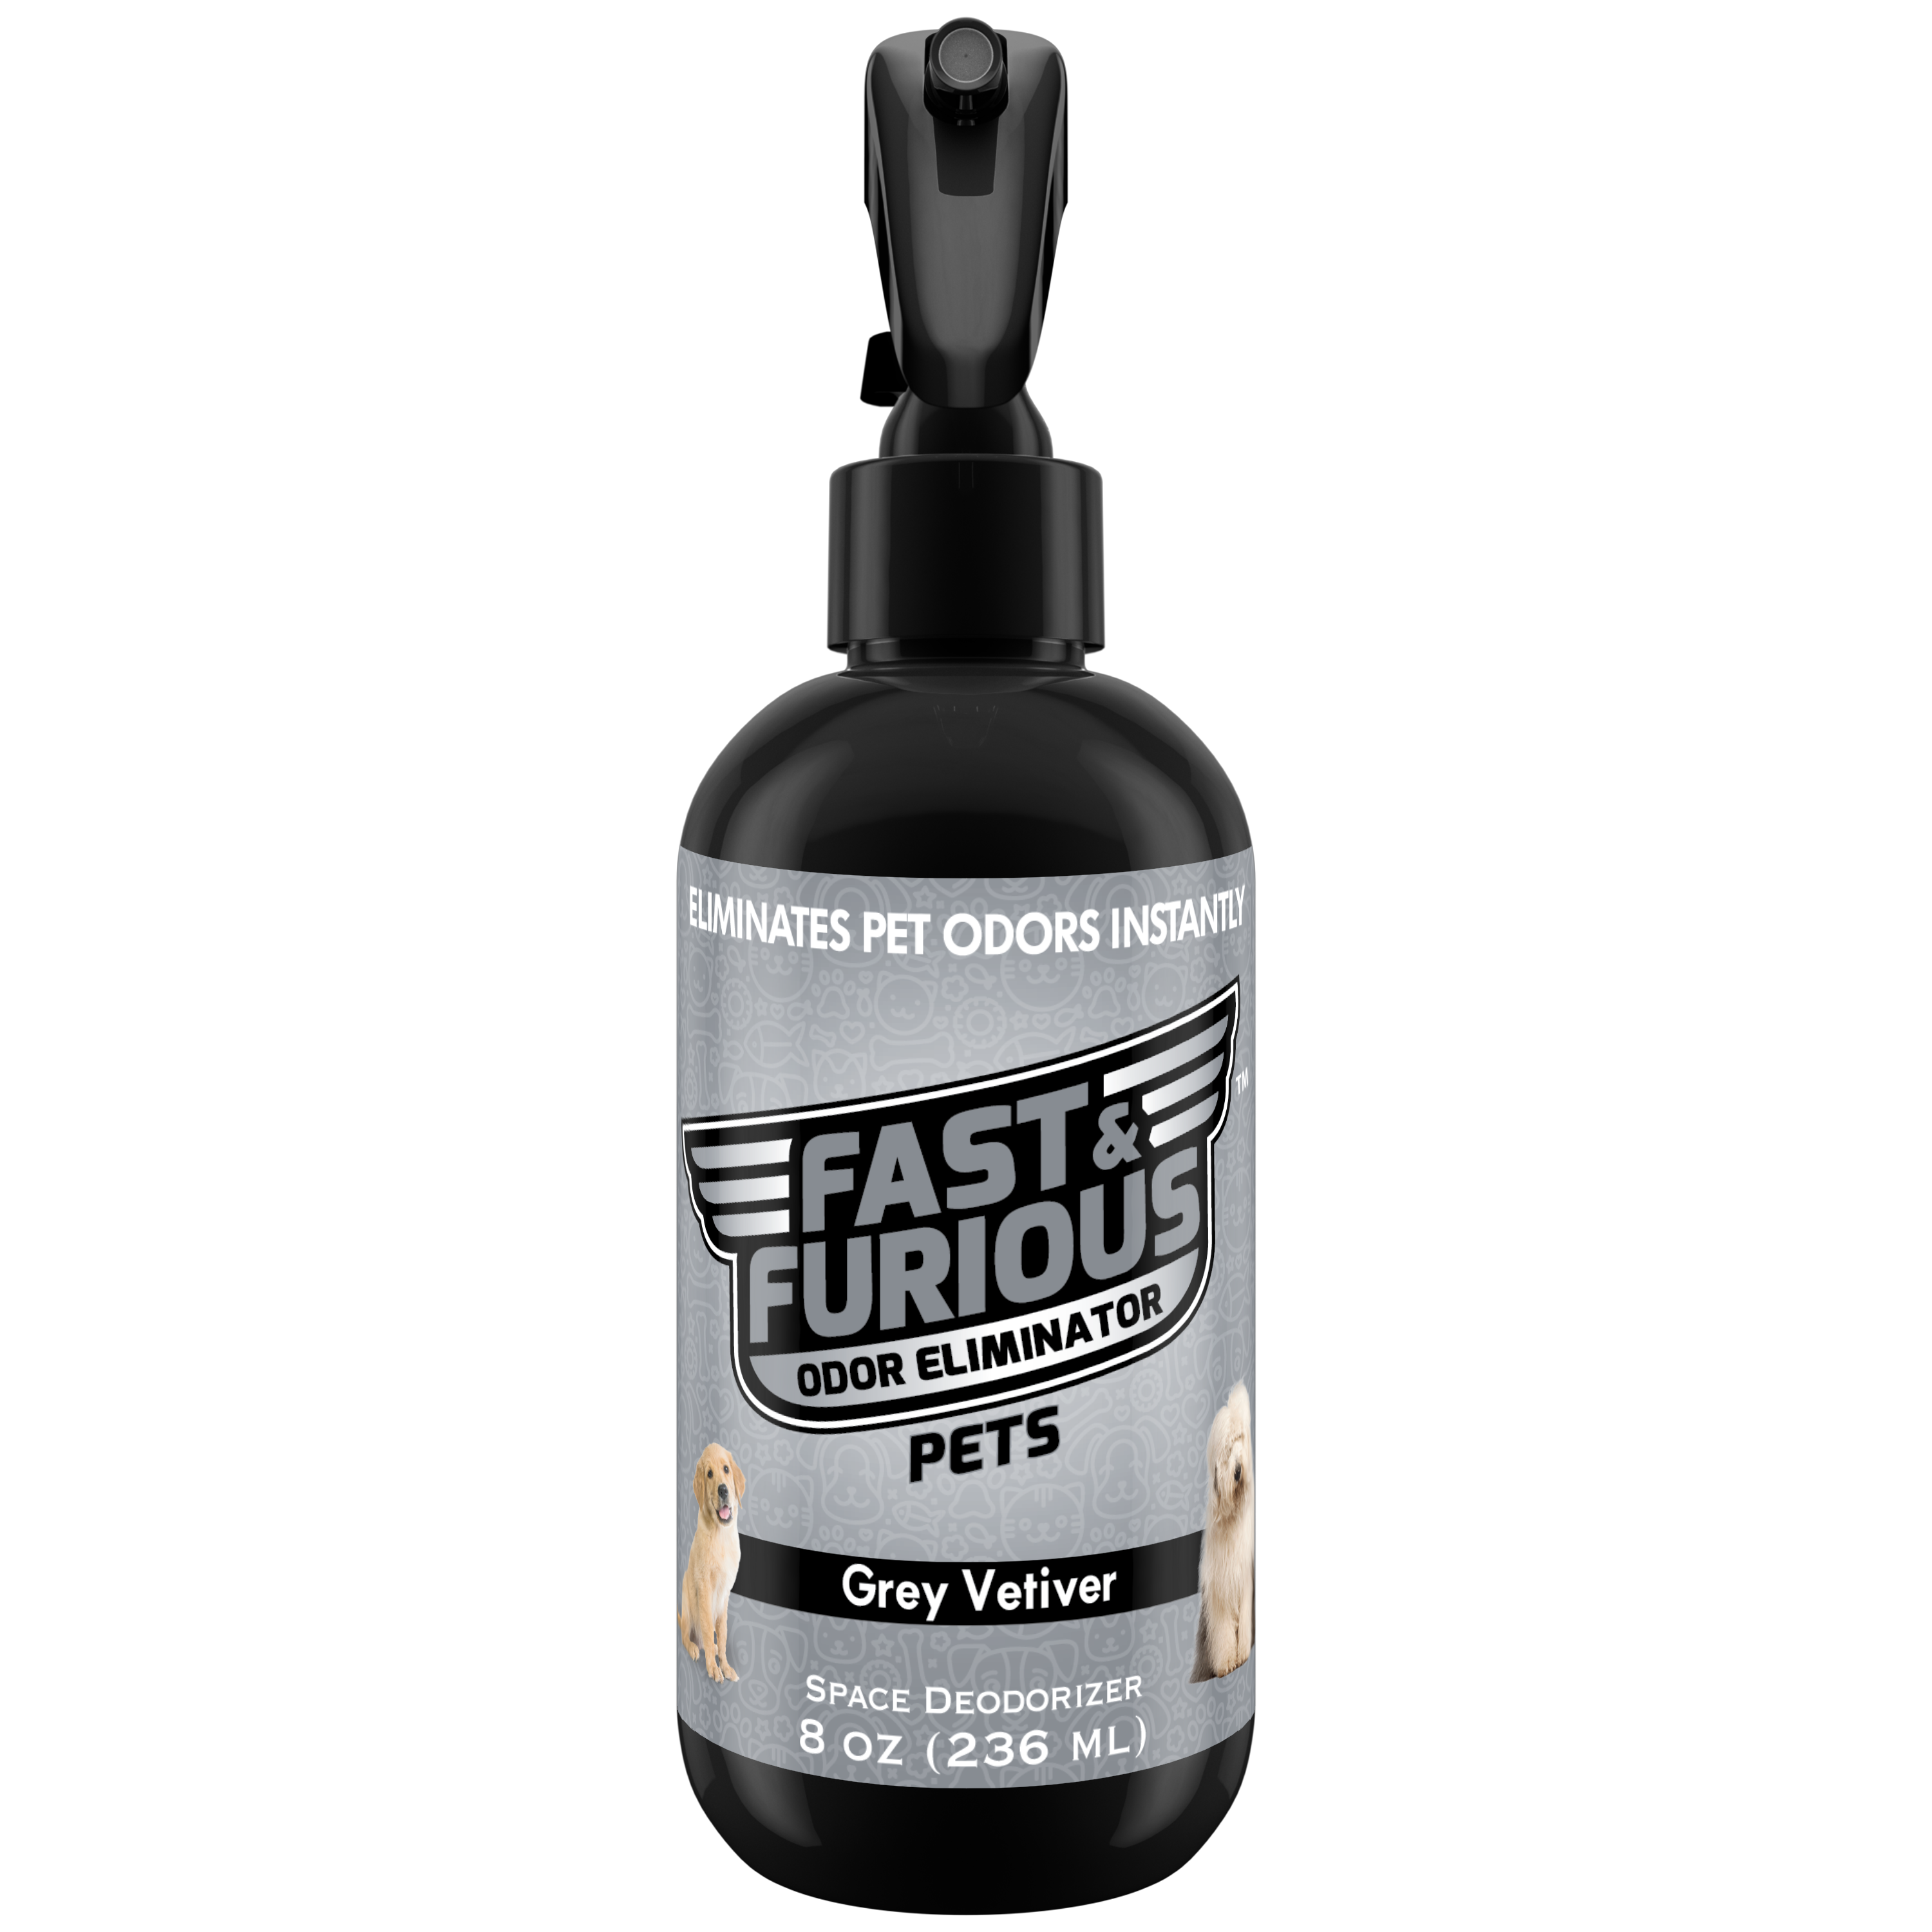 Fast and Furious Pets Odor Eliminator - Grey Vetiver Scent